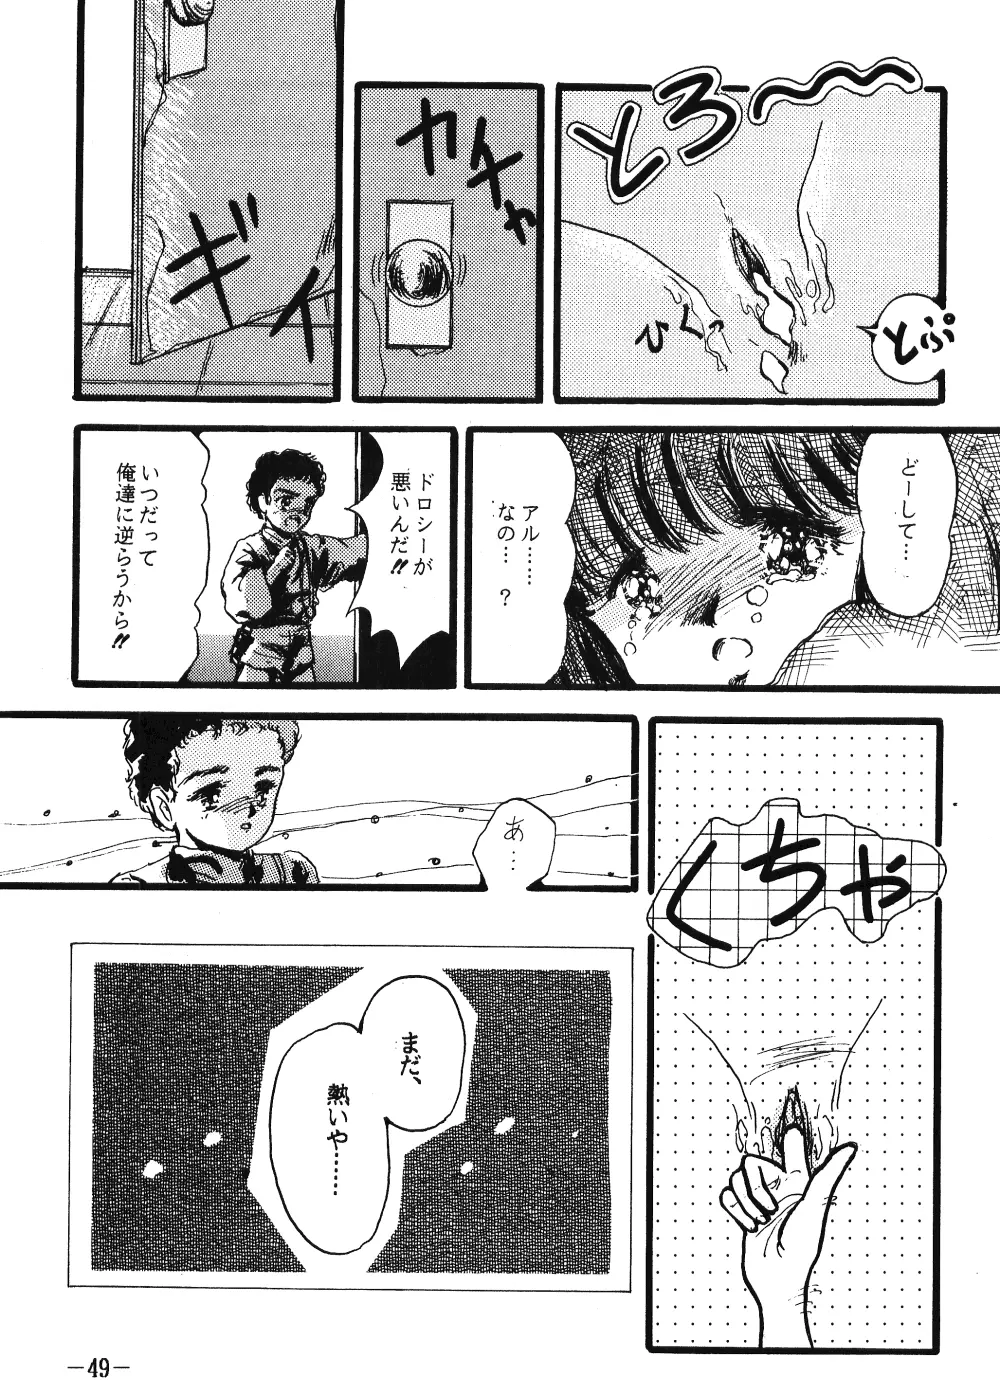 Fro2 Fight Vol. 1 Page.49